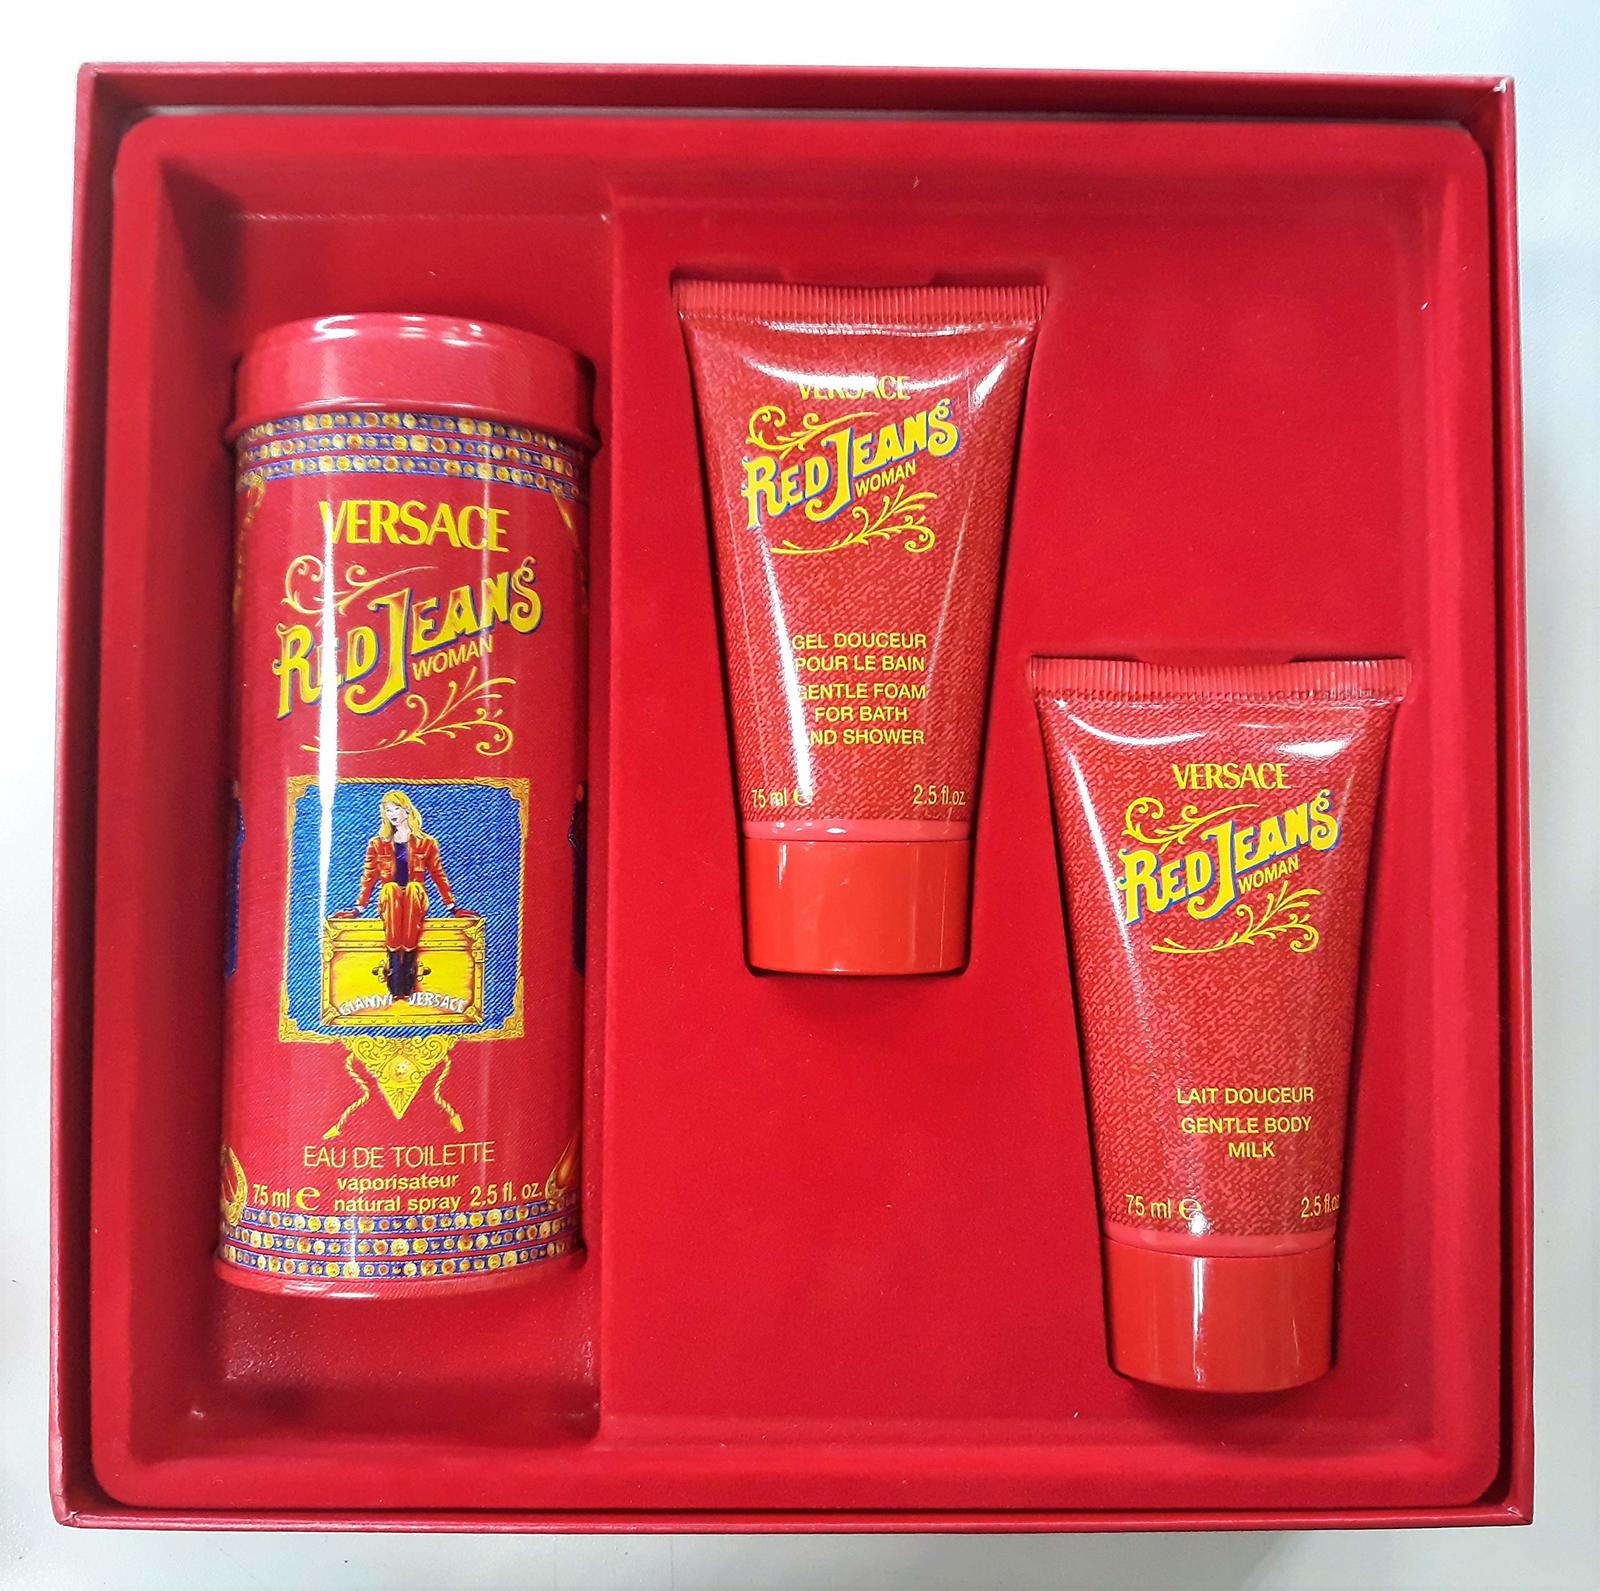 Red Jeans 2.5oz. 3pc Women Gift Sets by Gianni Versace - $29.35